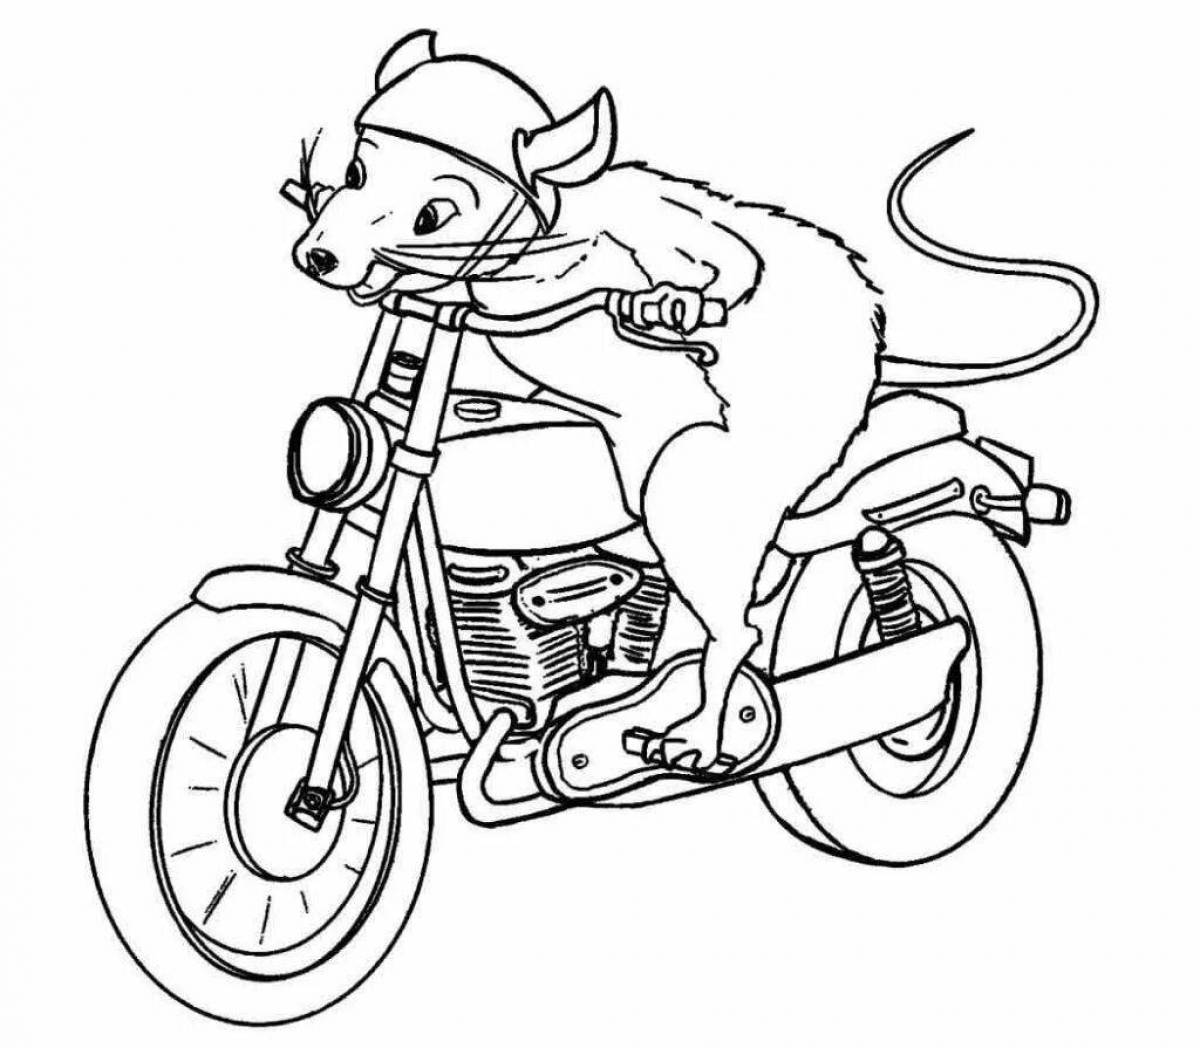 Incredible motorcycle coloring pages for 6-7 year olds